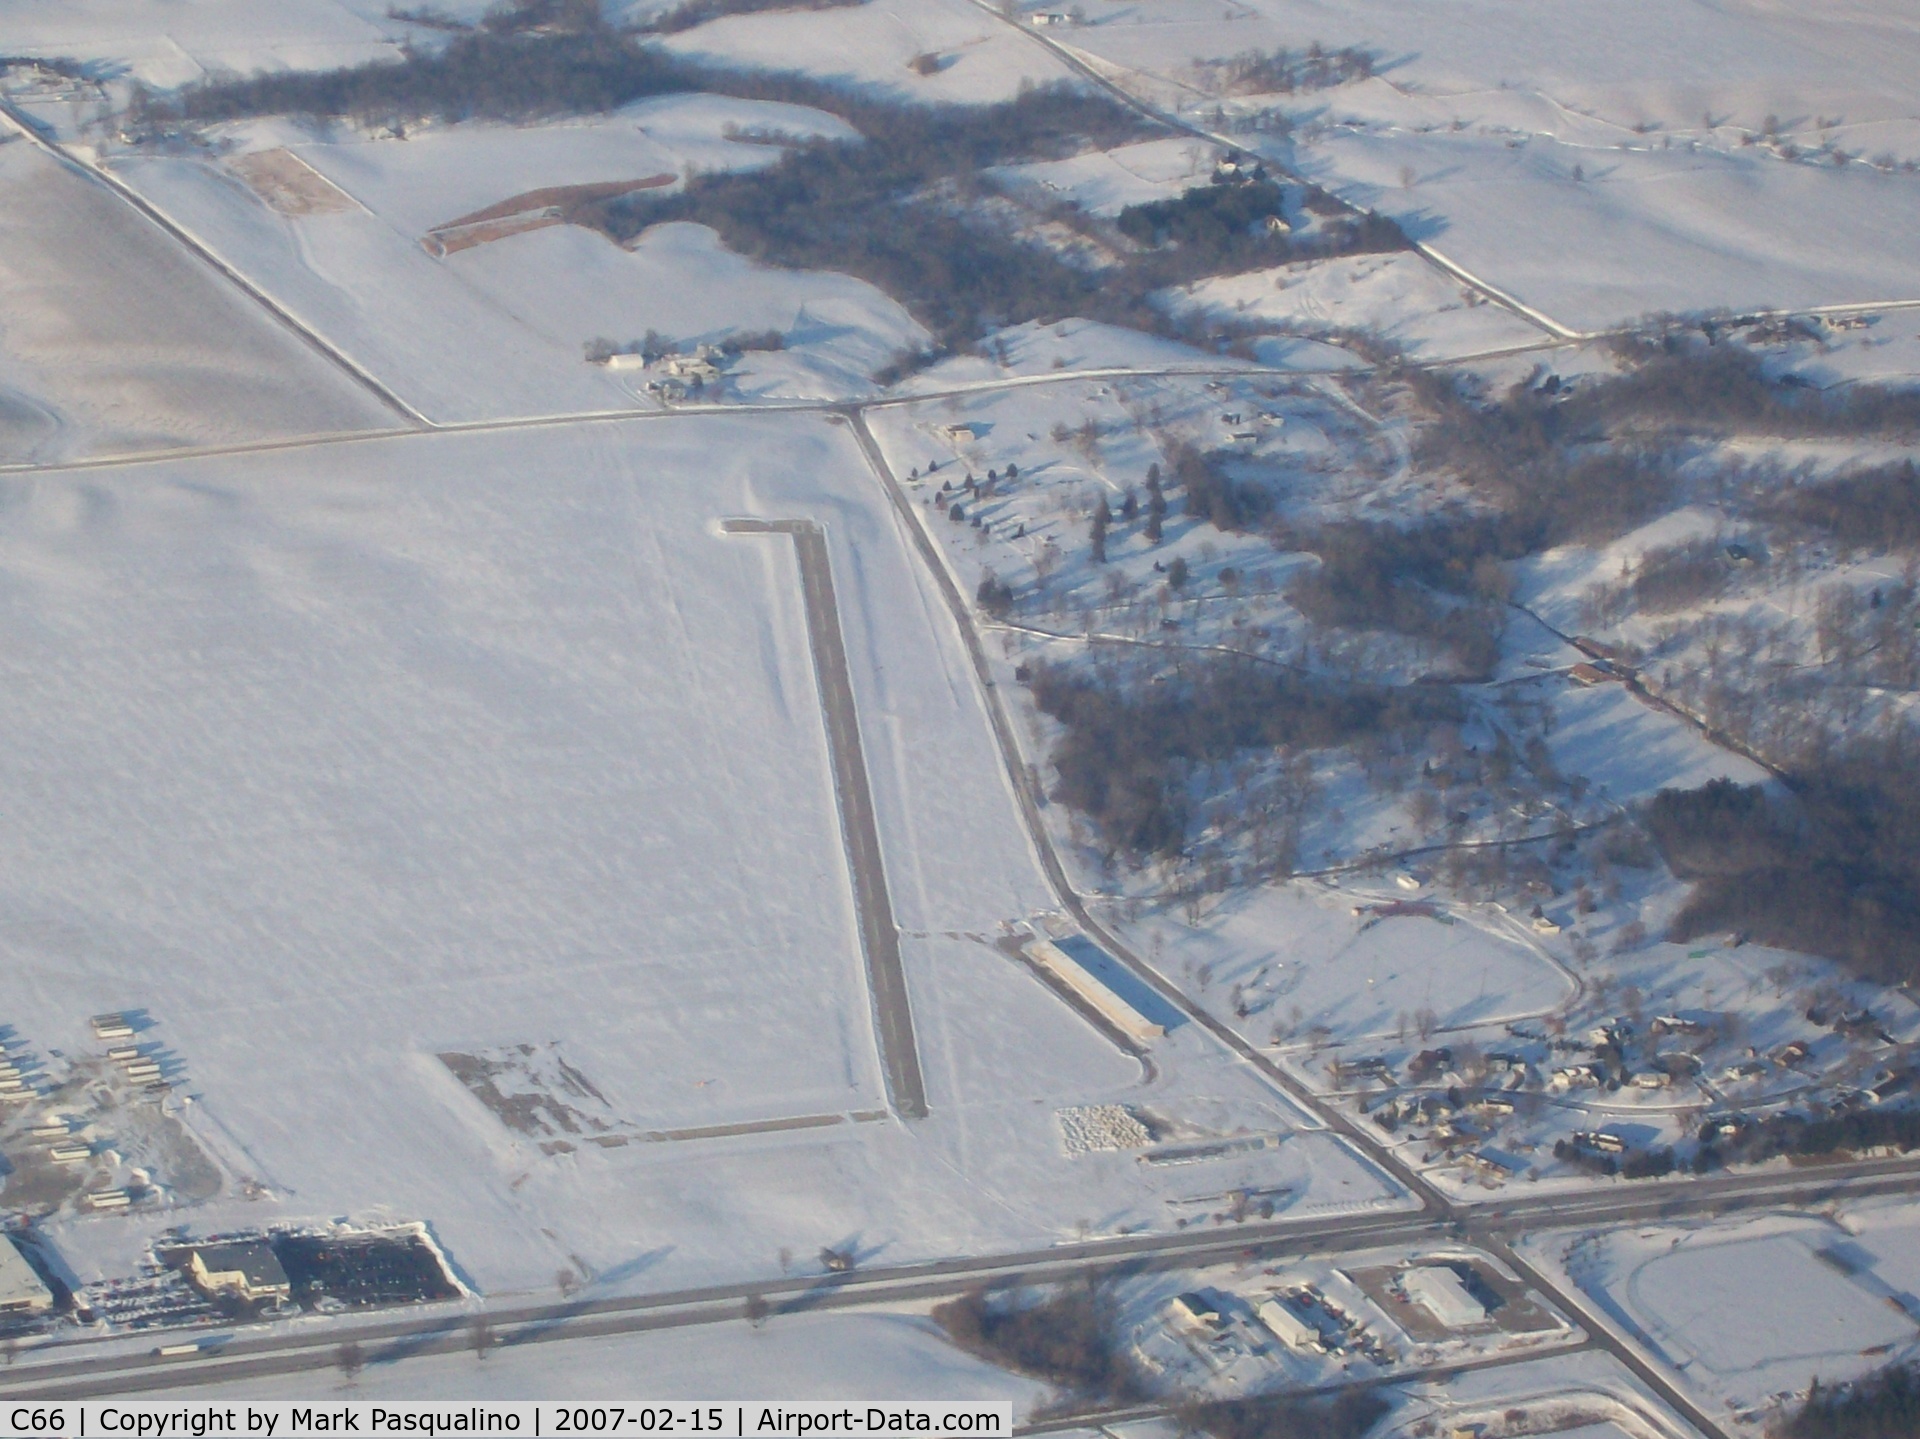 Monmouth Municipal Airport (C66) - Monmouth, IL